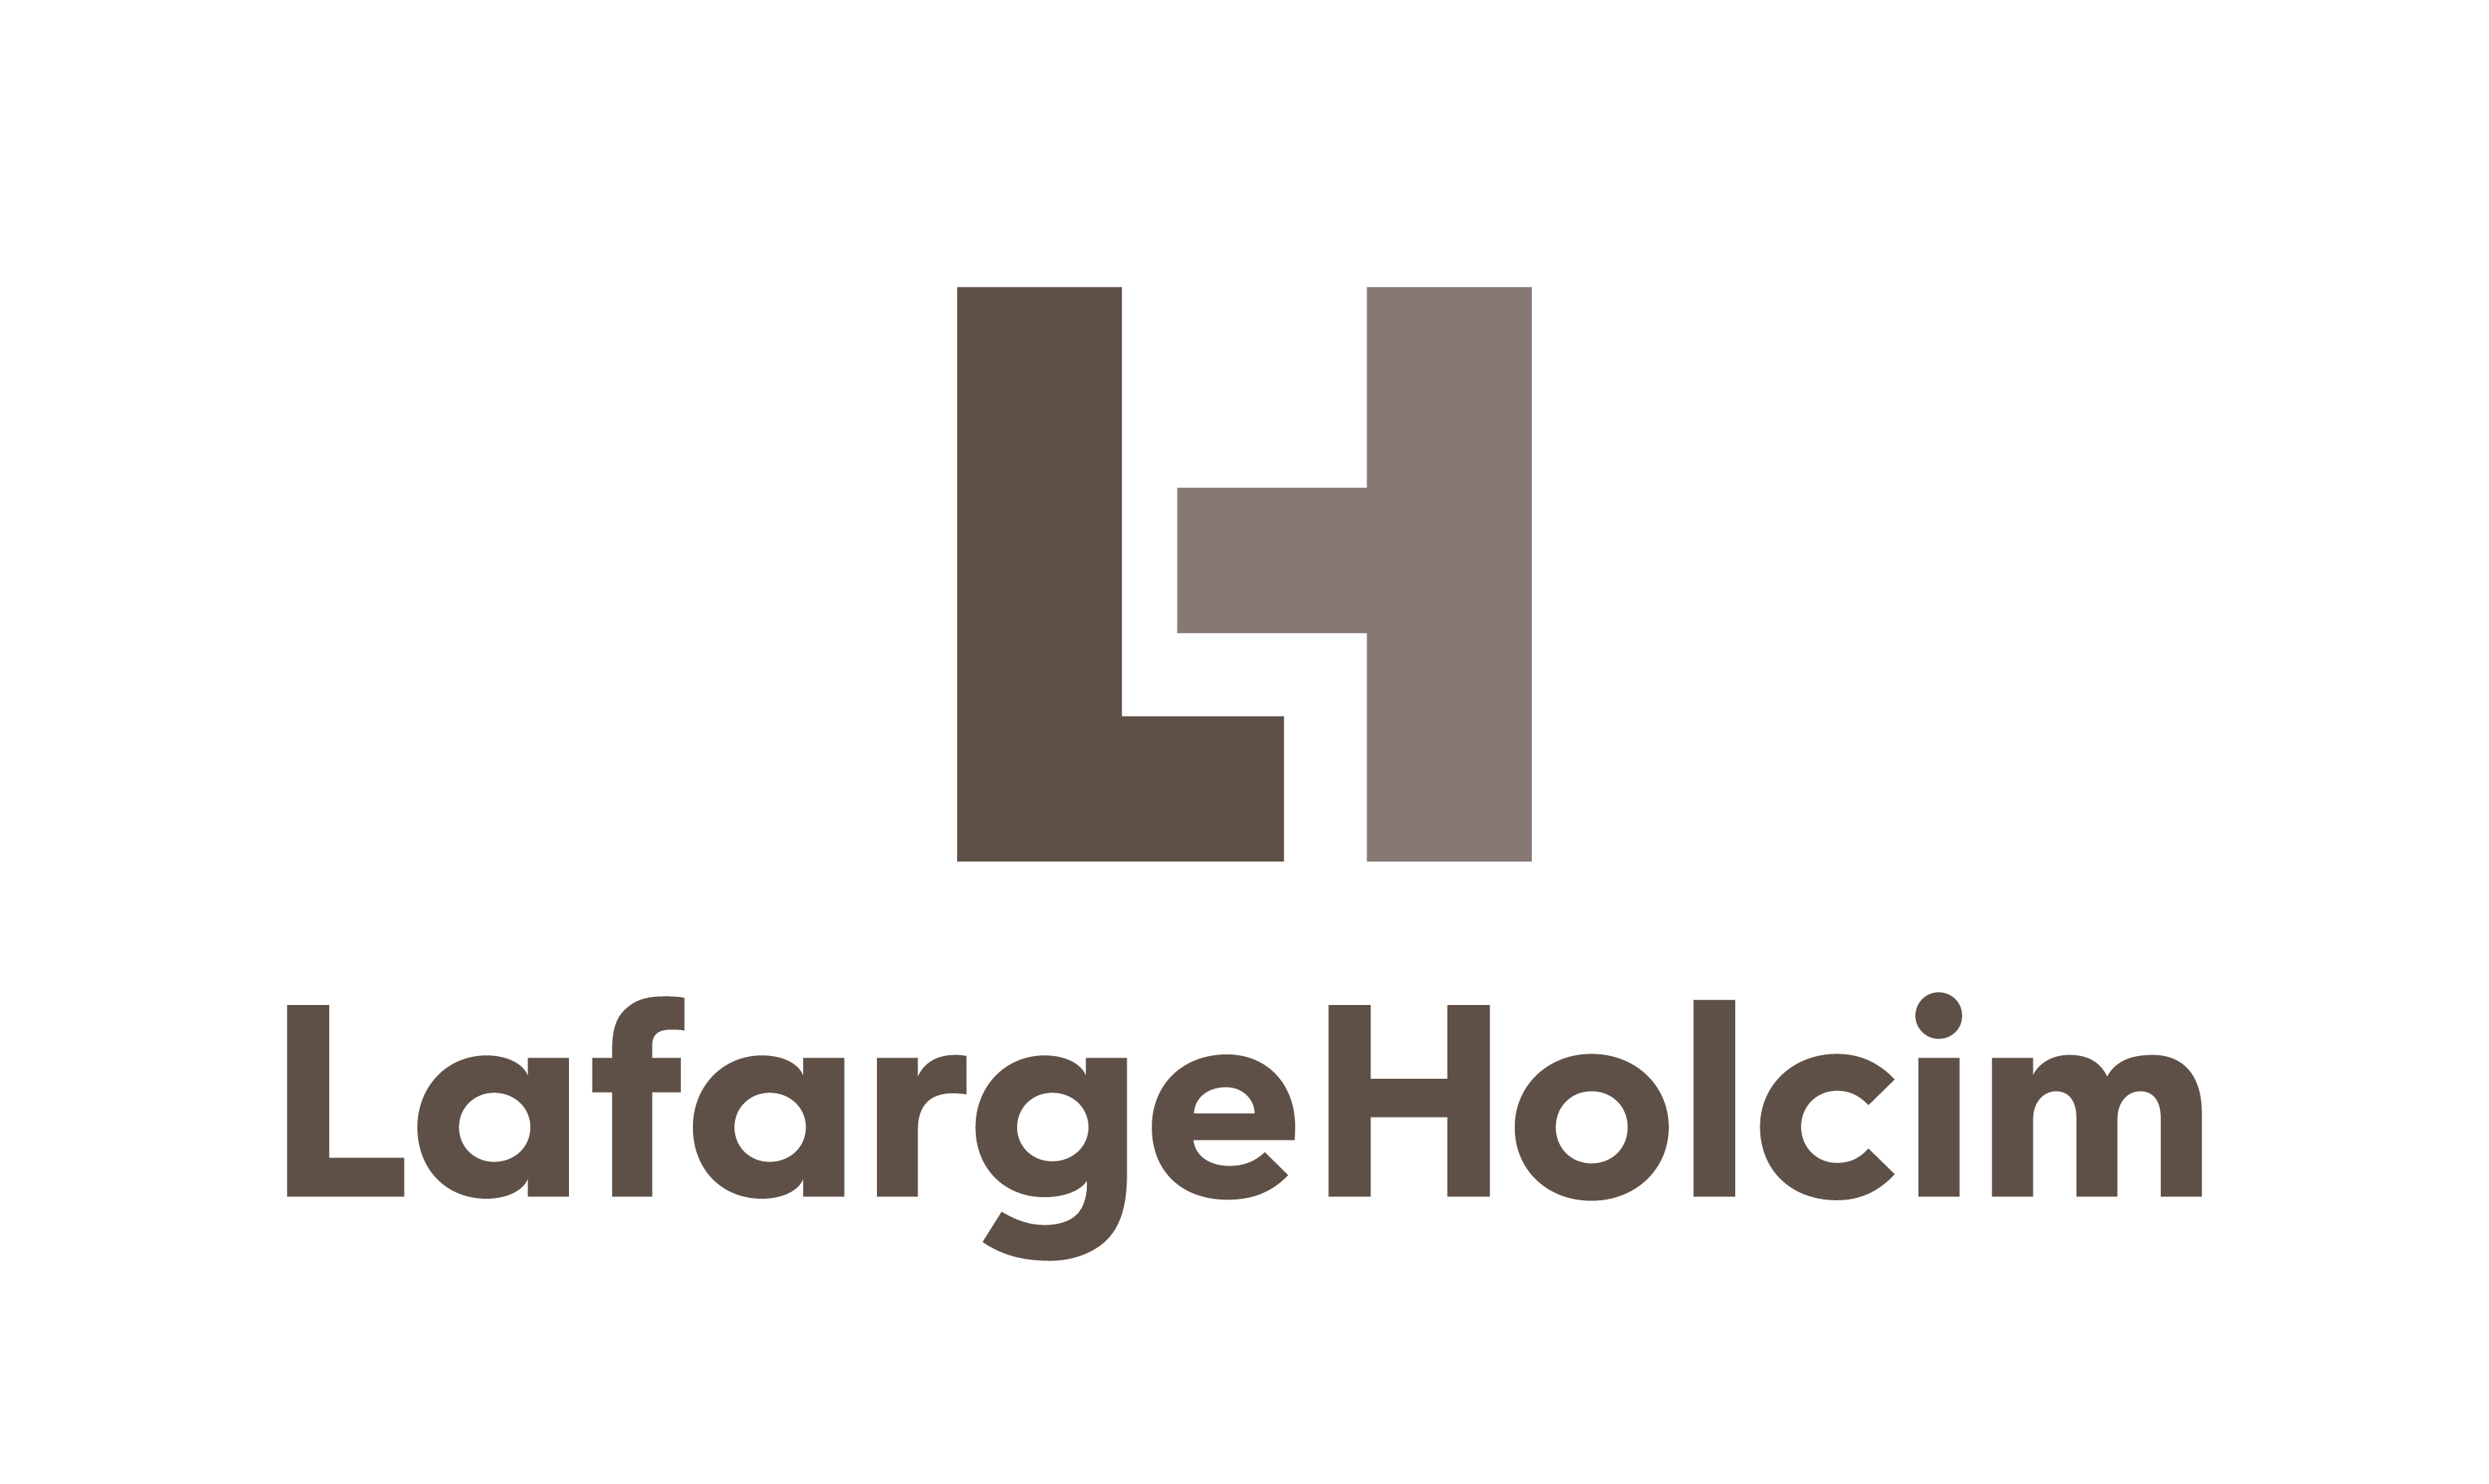  LafargeHolcim says bolt-on acquisitions are a key driver of its growth strategy